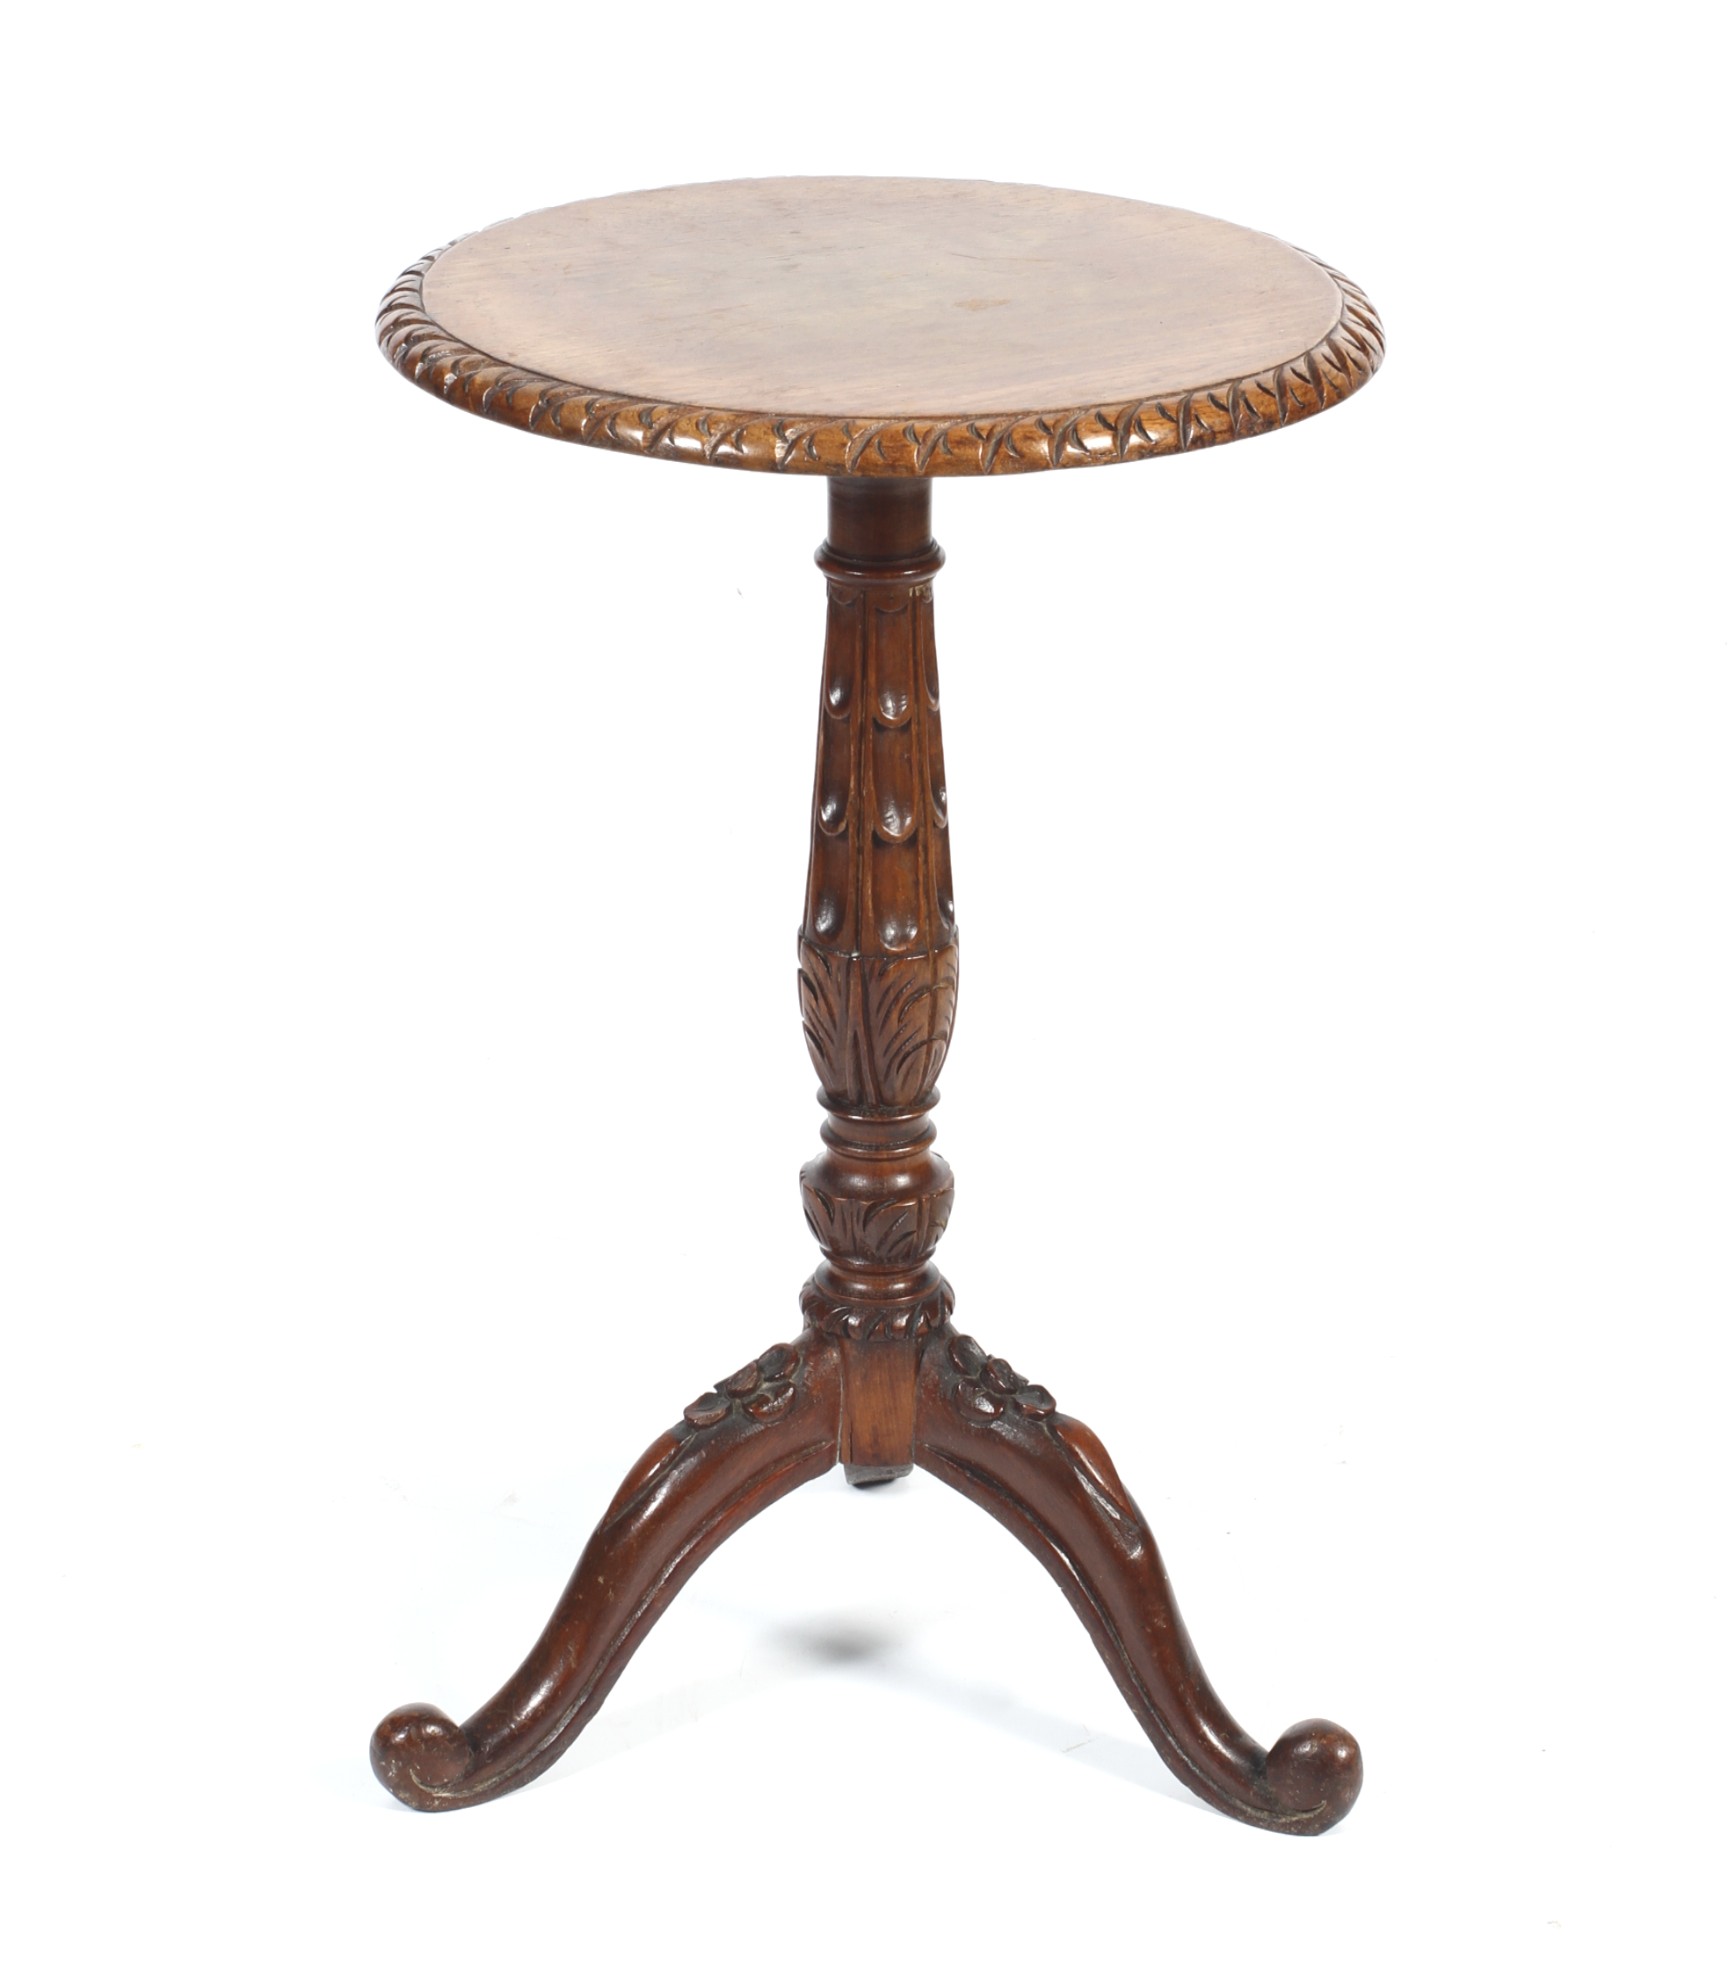 An early 20th century carved oak wine table.